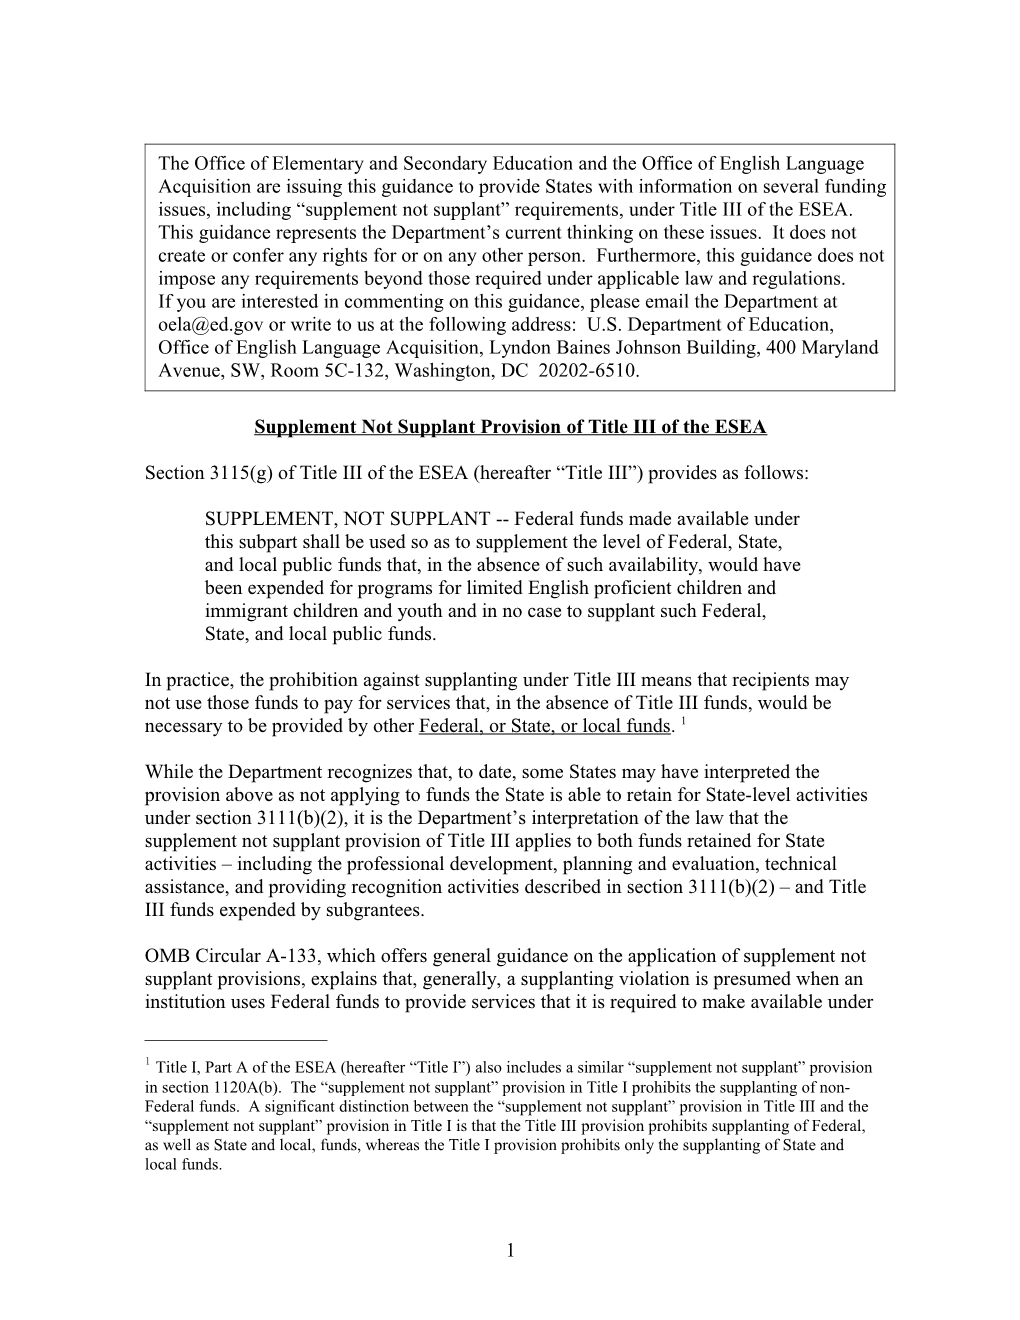 Supplement Not Supplant Provison of Title III of the ESEA (Word Document)